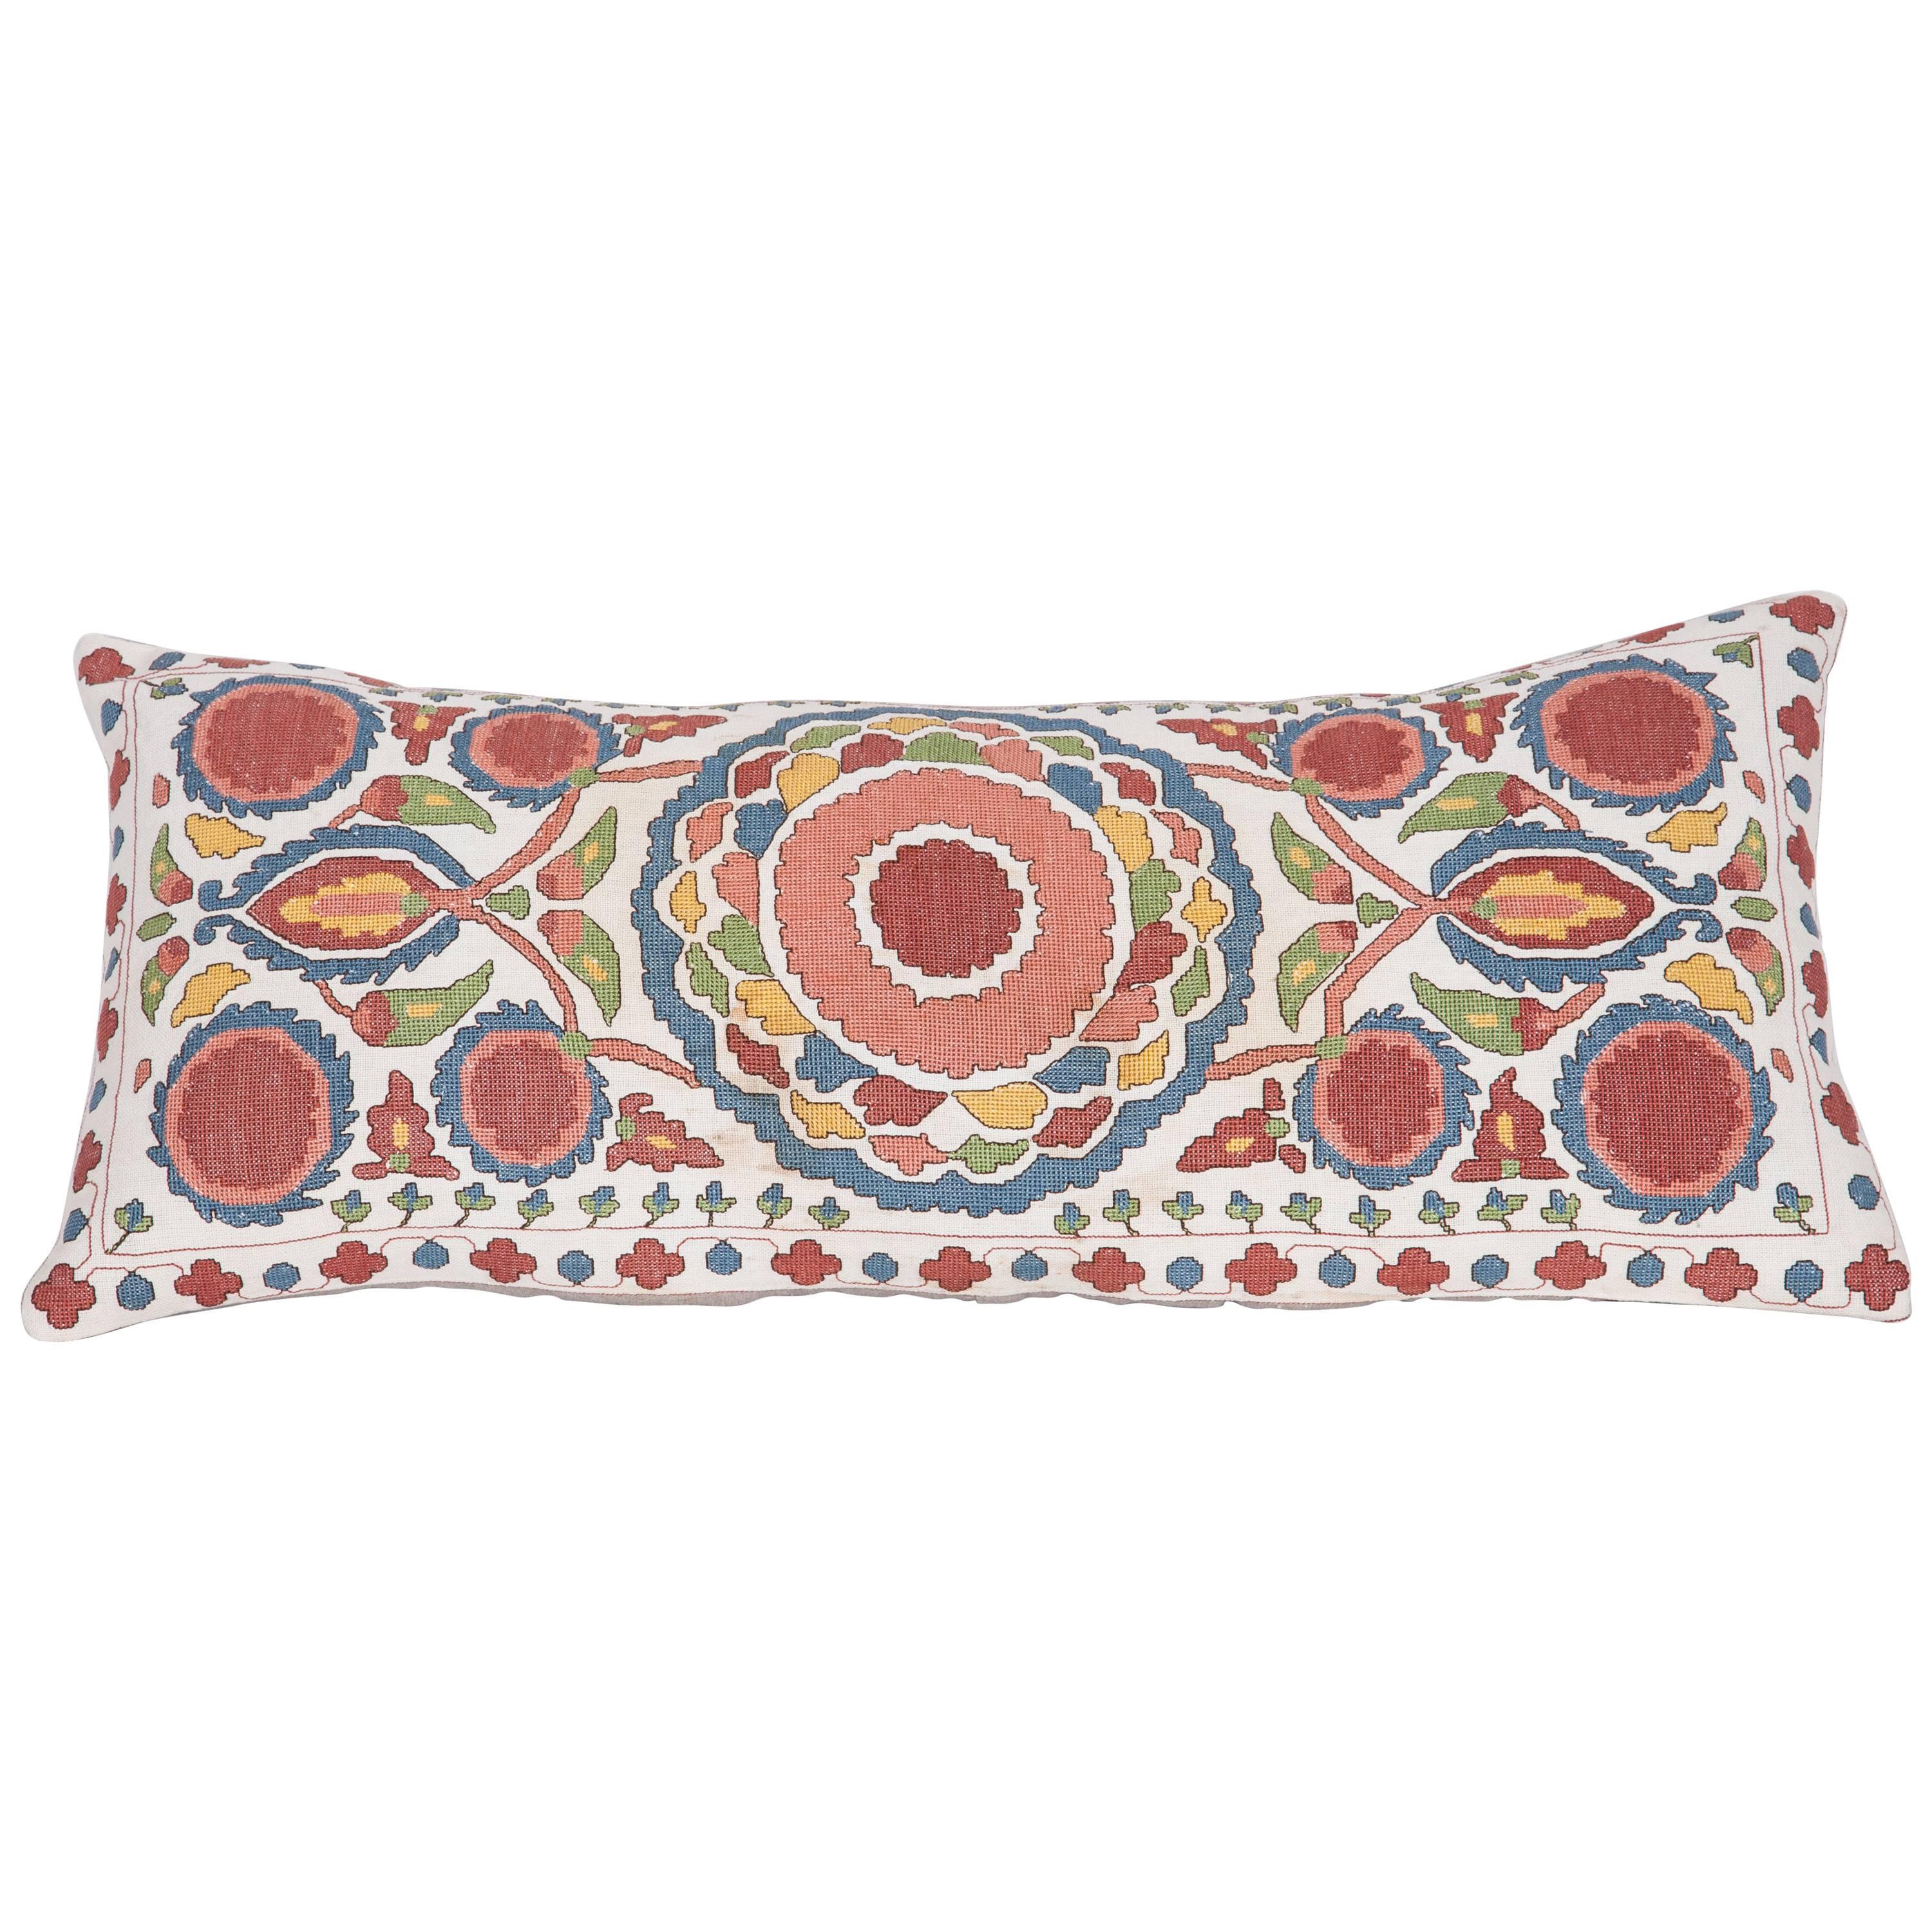 Antique Pillow Made Out of an Early 20th Century Bulgarian Embroidery